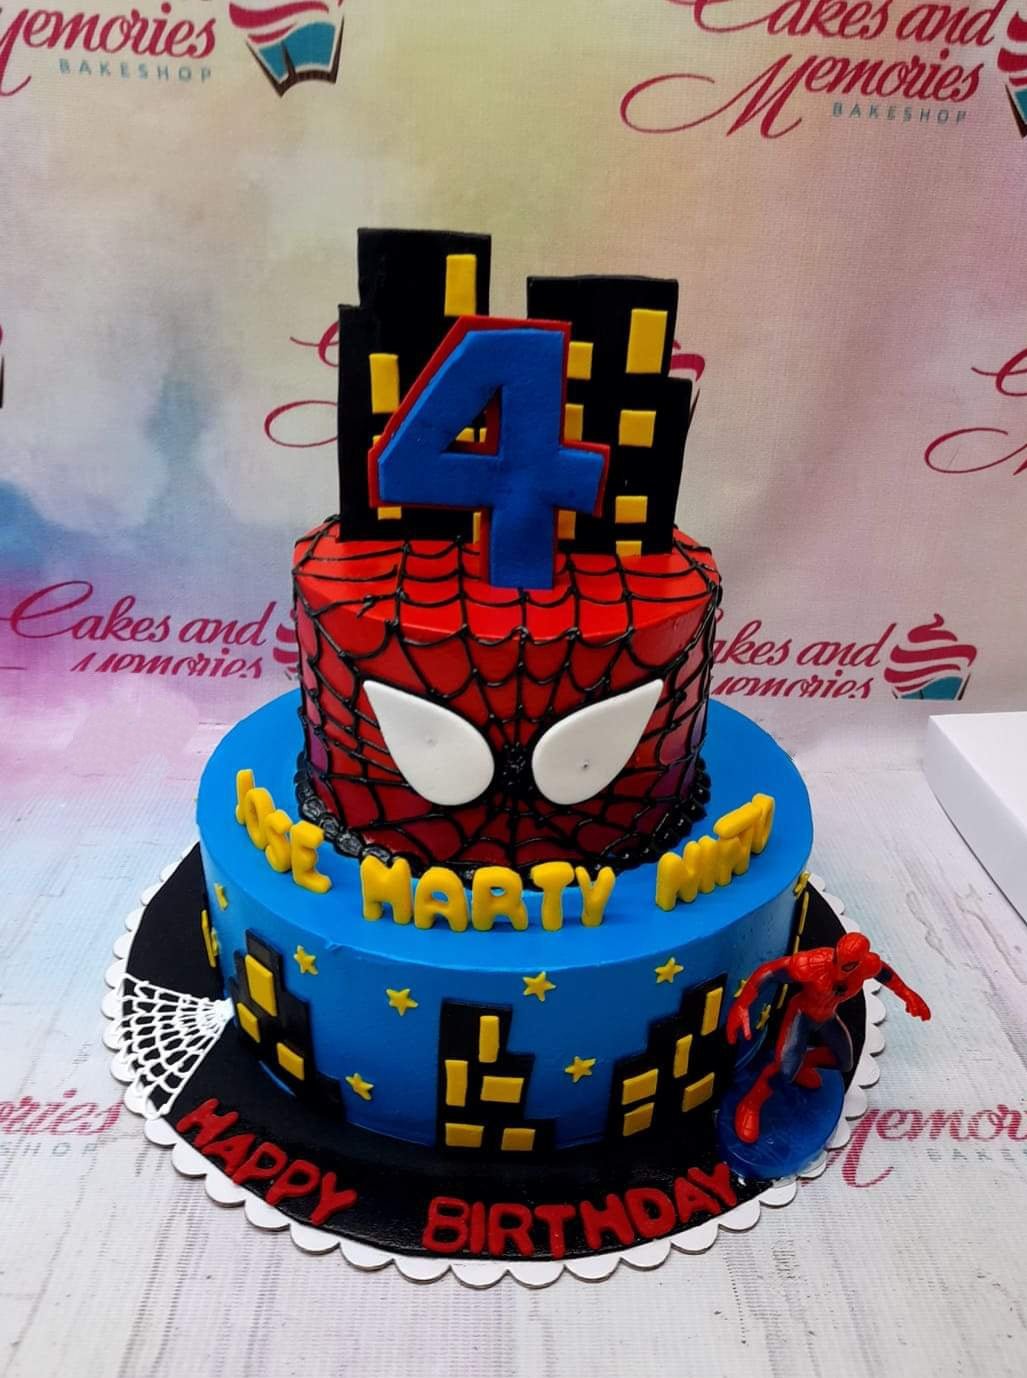 How to Make A Spiderman Cake (with Homemade cake and Frosting)